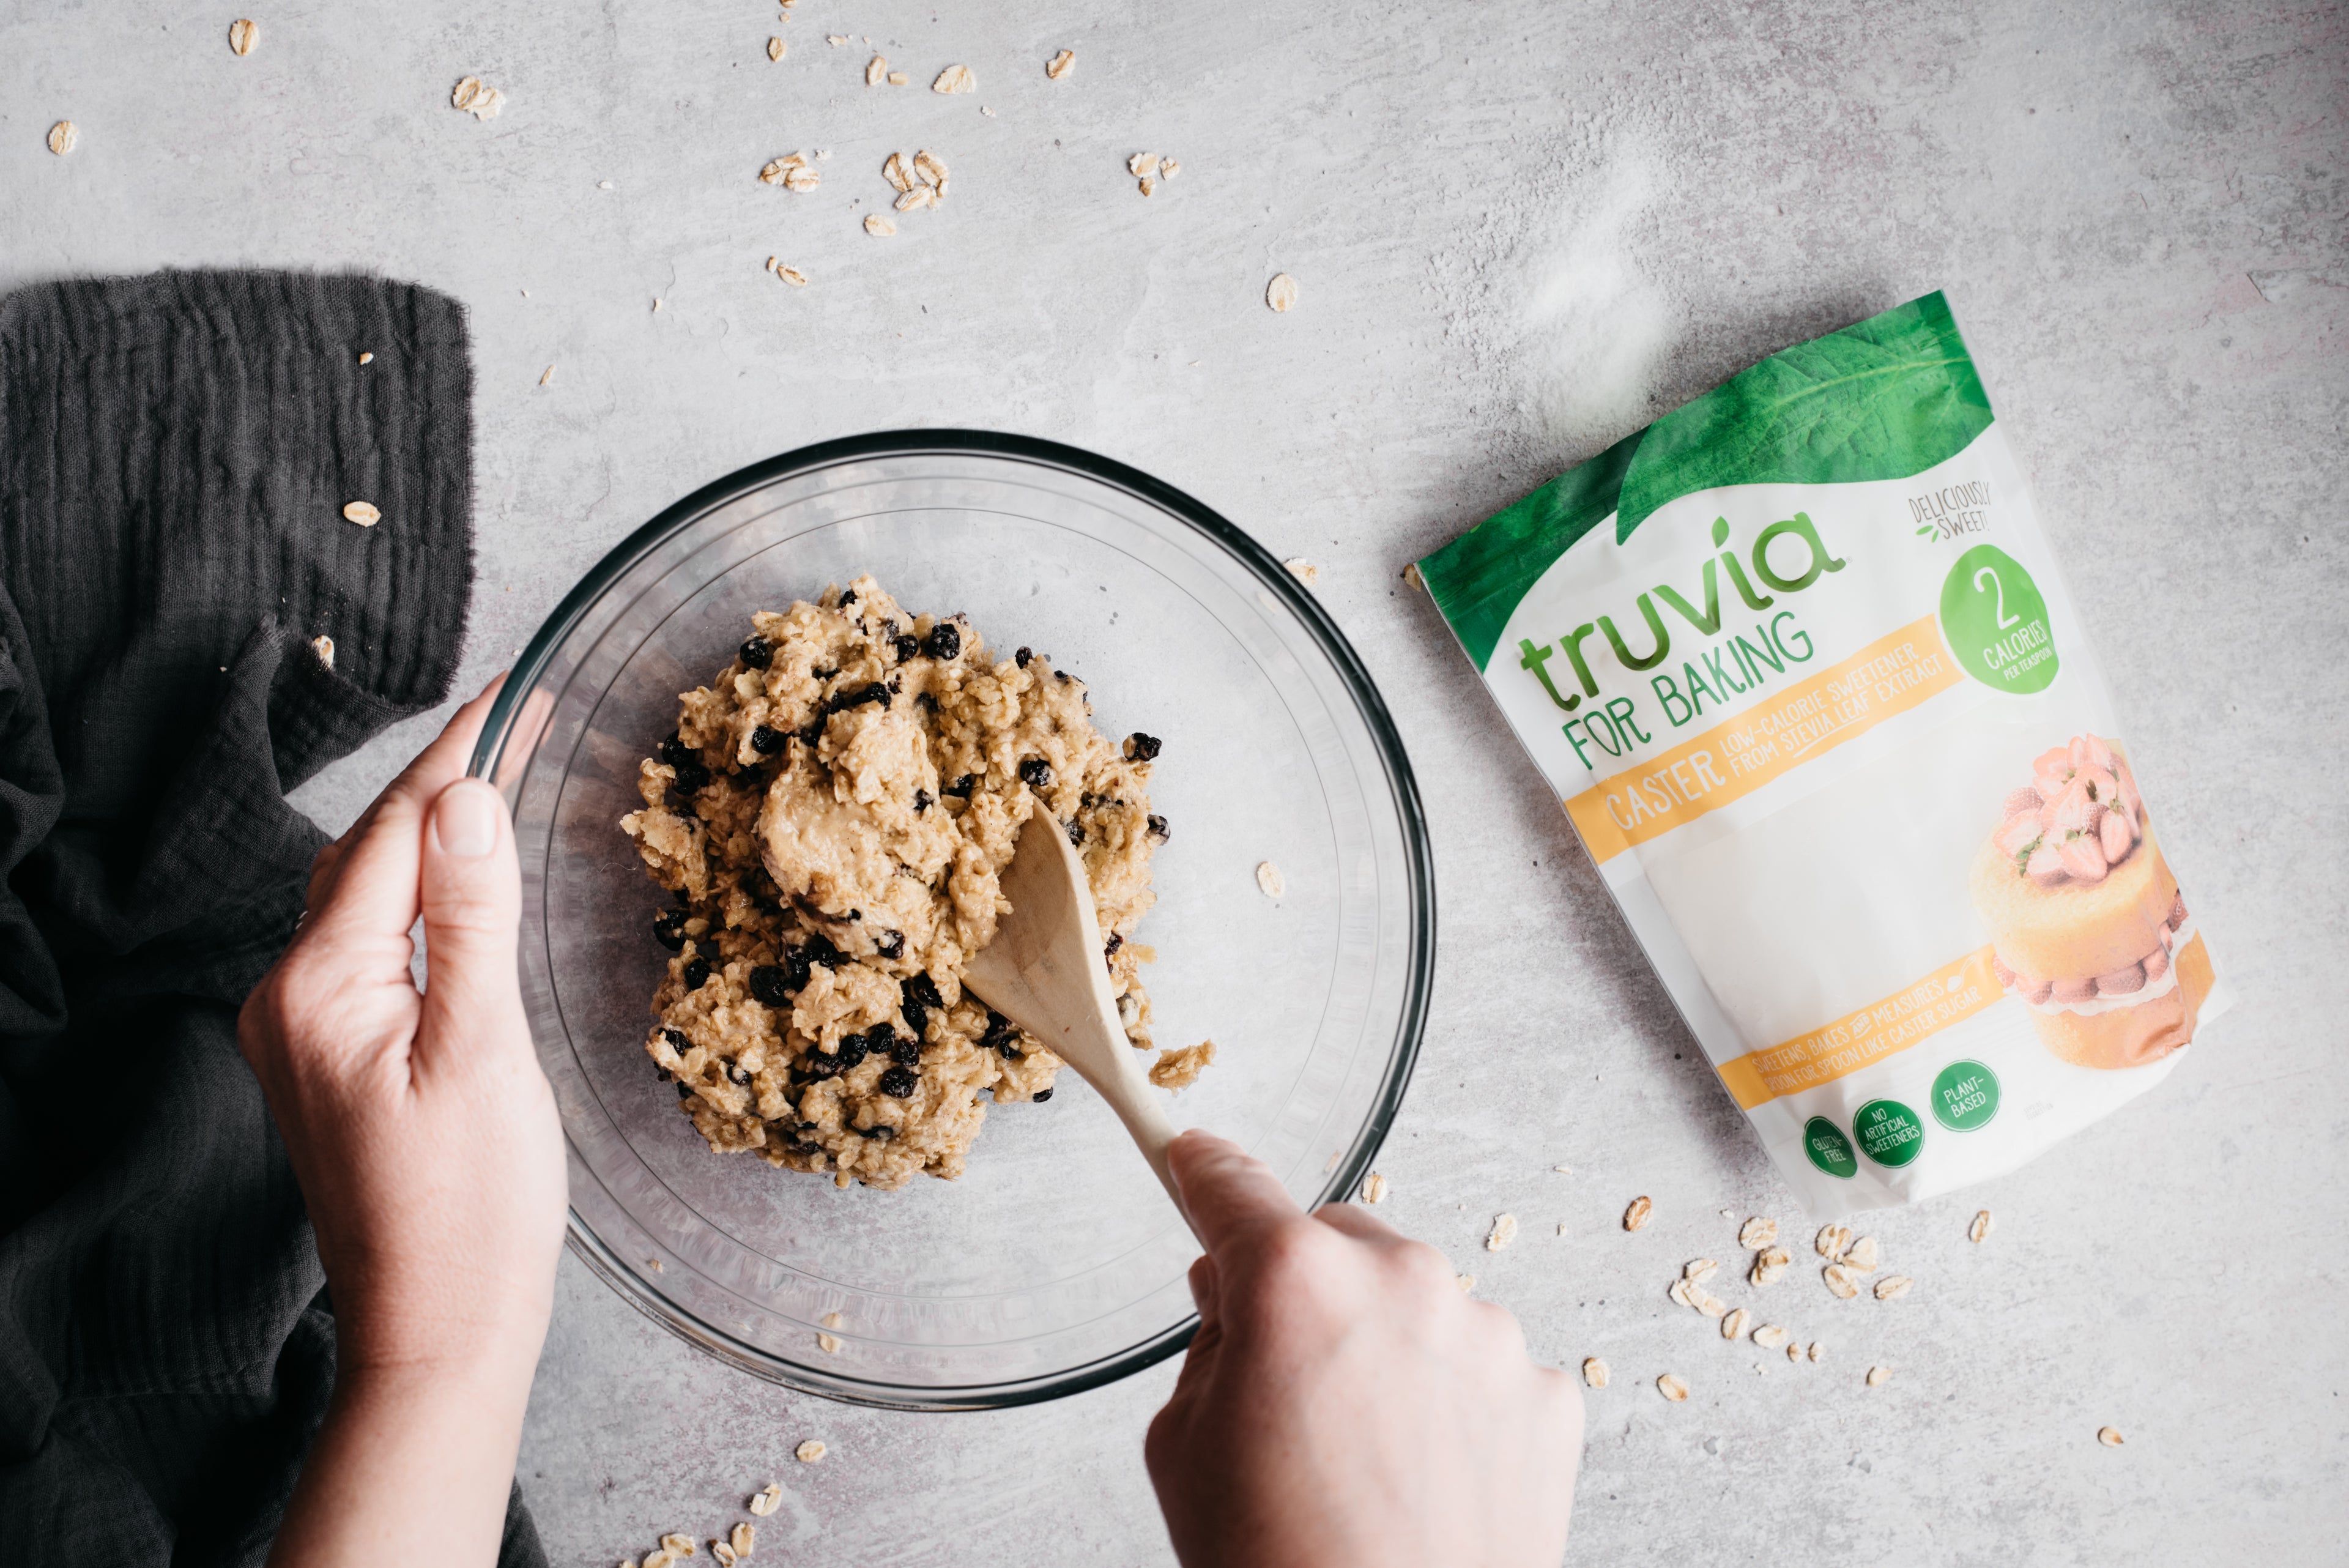 Hands mixing Oat & Raisin Cookie dough using a wooden spoon, next to a pack of Truvia for Baking Caster low calorie sweetener